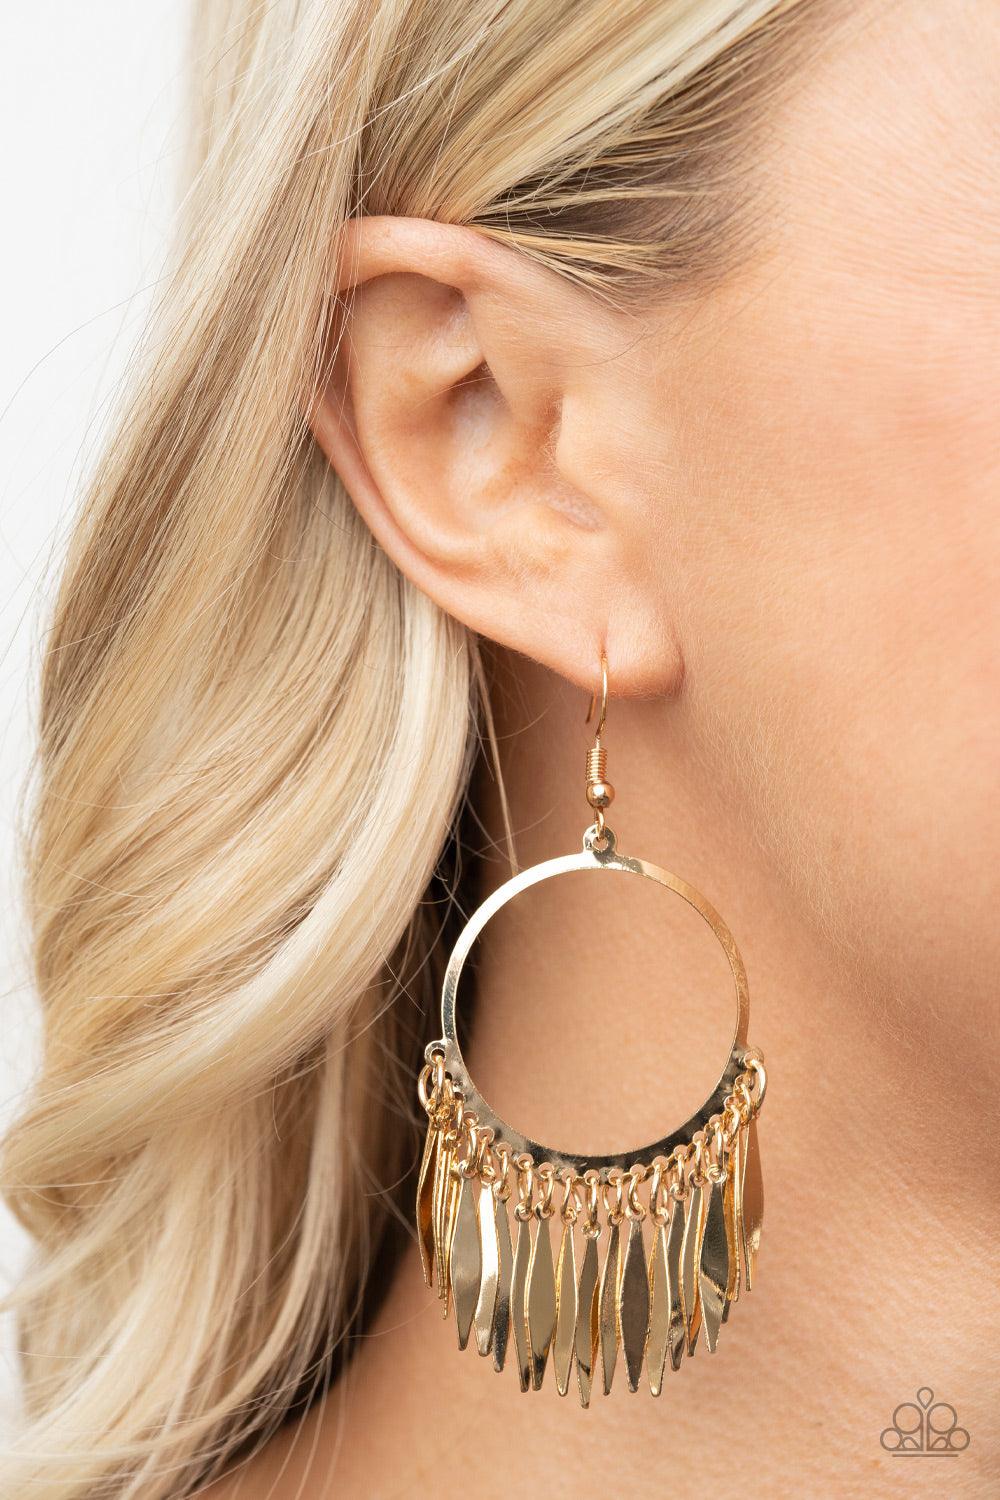 Paparazzi Accessories Radiant Chimes - Gold Flared flat bars stream out from the bottom of a glistening gold hoop, creating a radiant fringe. Earring attaches to a standard fishhook fitting. Sold as one pair of earrings. Jewelry